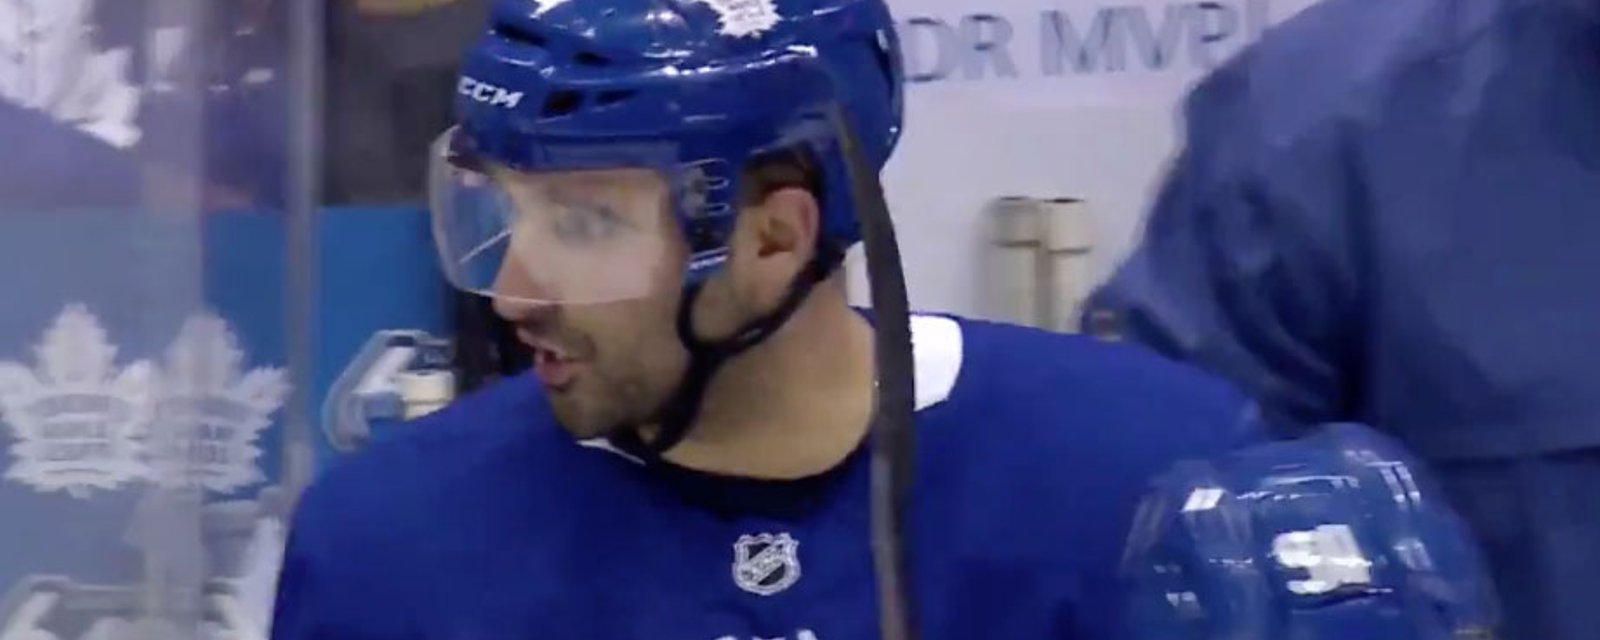 Kadri wins chirp of the year with response to Hawryluk after he scored his second goal of the game!